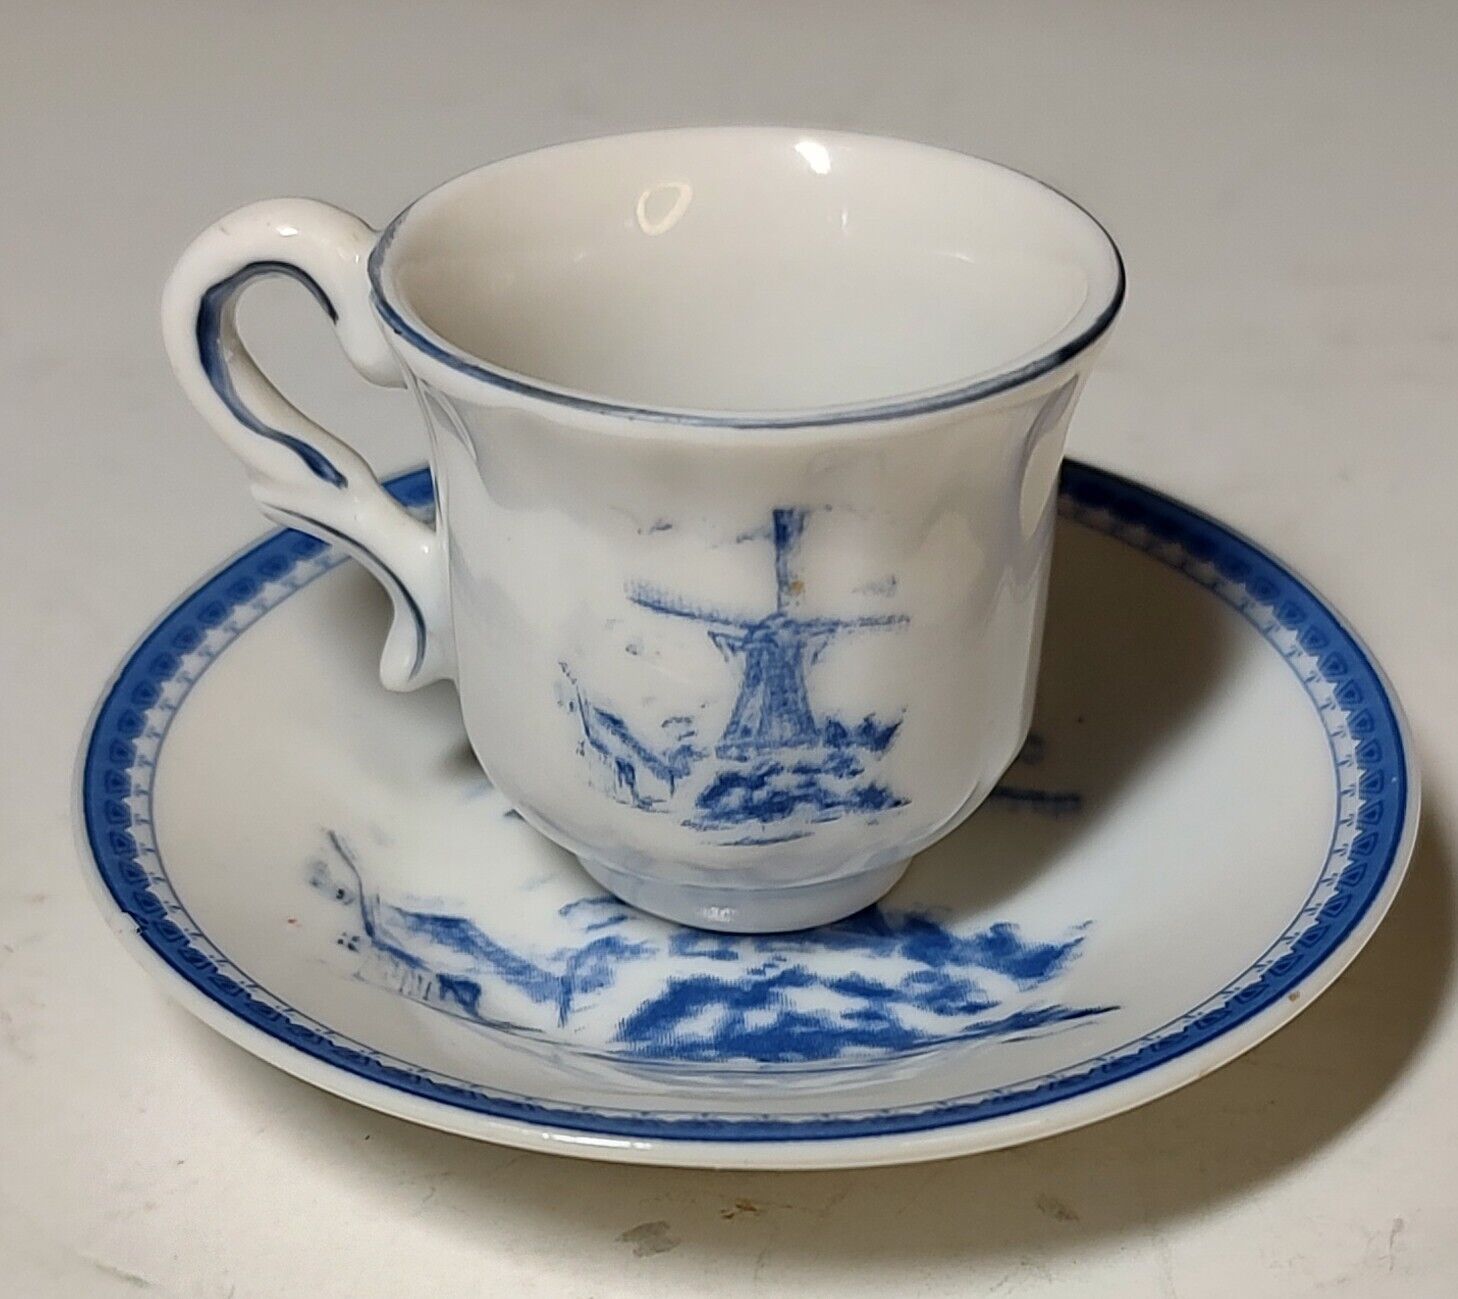 Vintage Imperial Porcelain White and Blue Windmill Teacup and Saucer Miniature